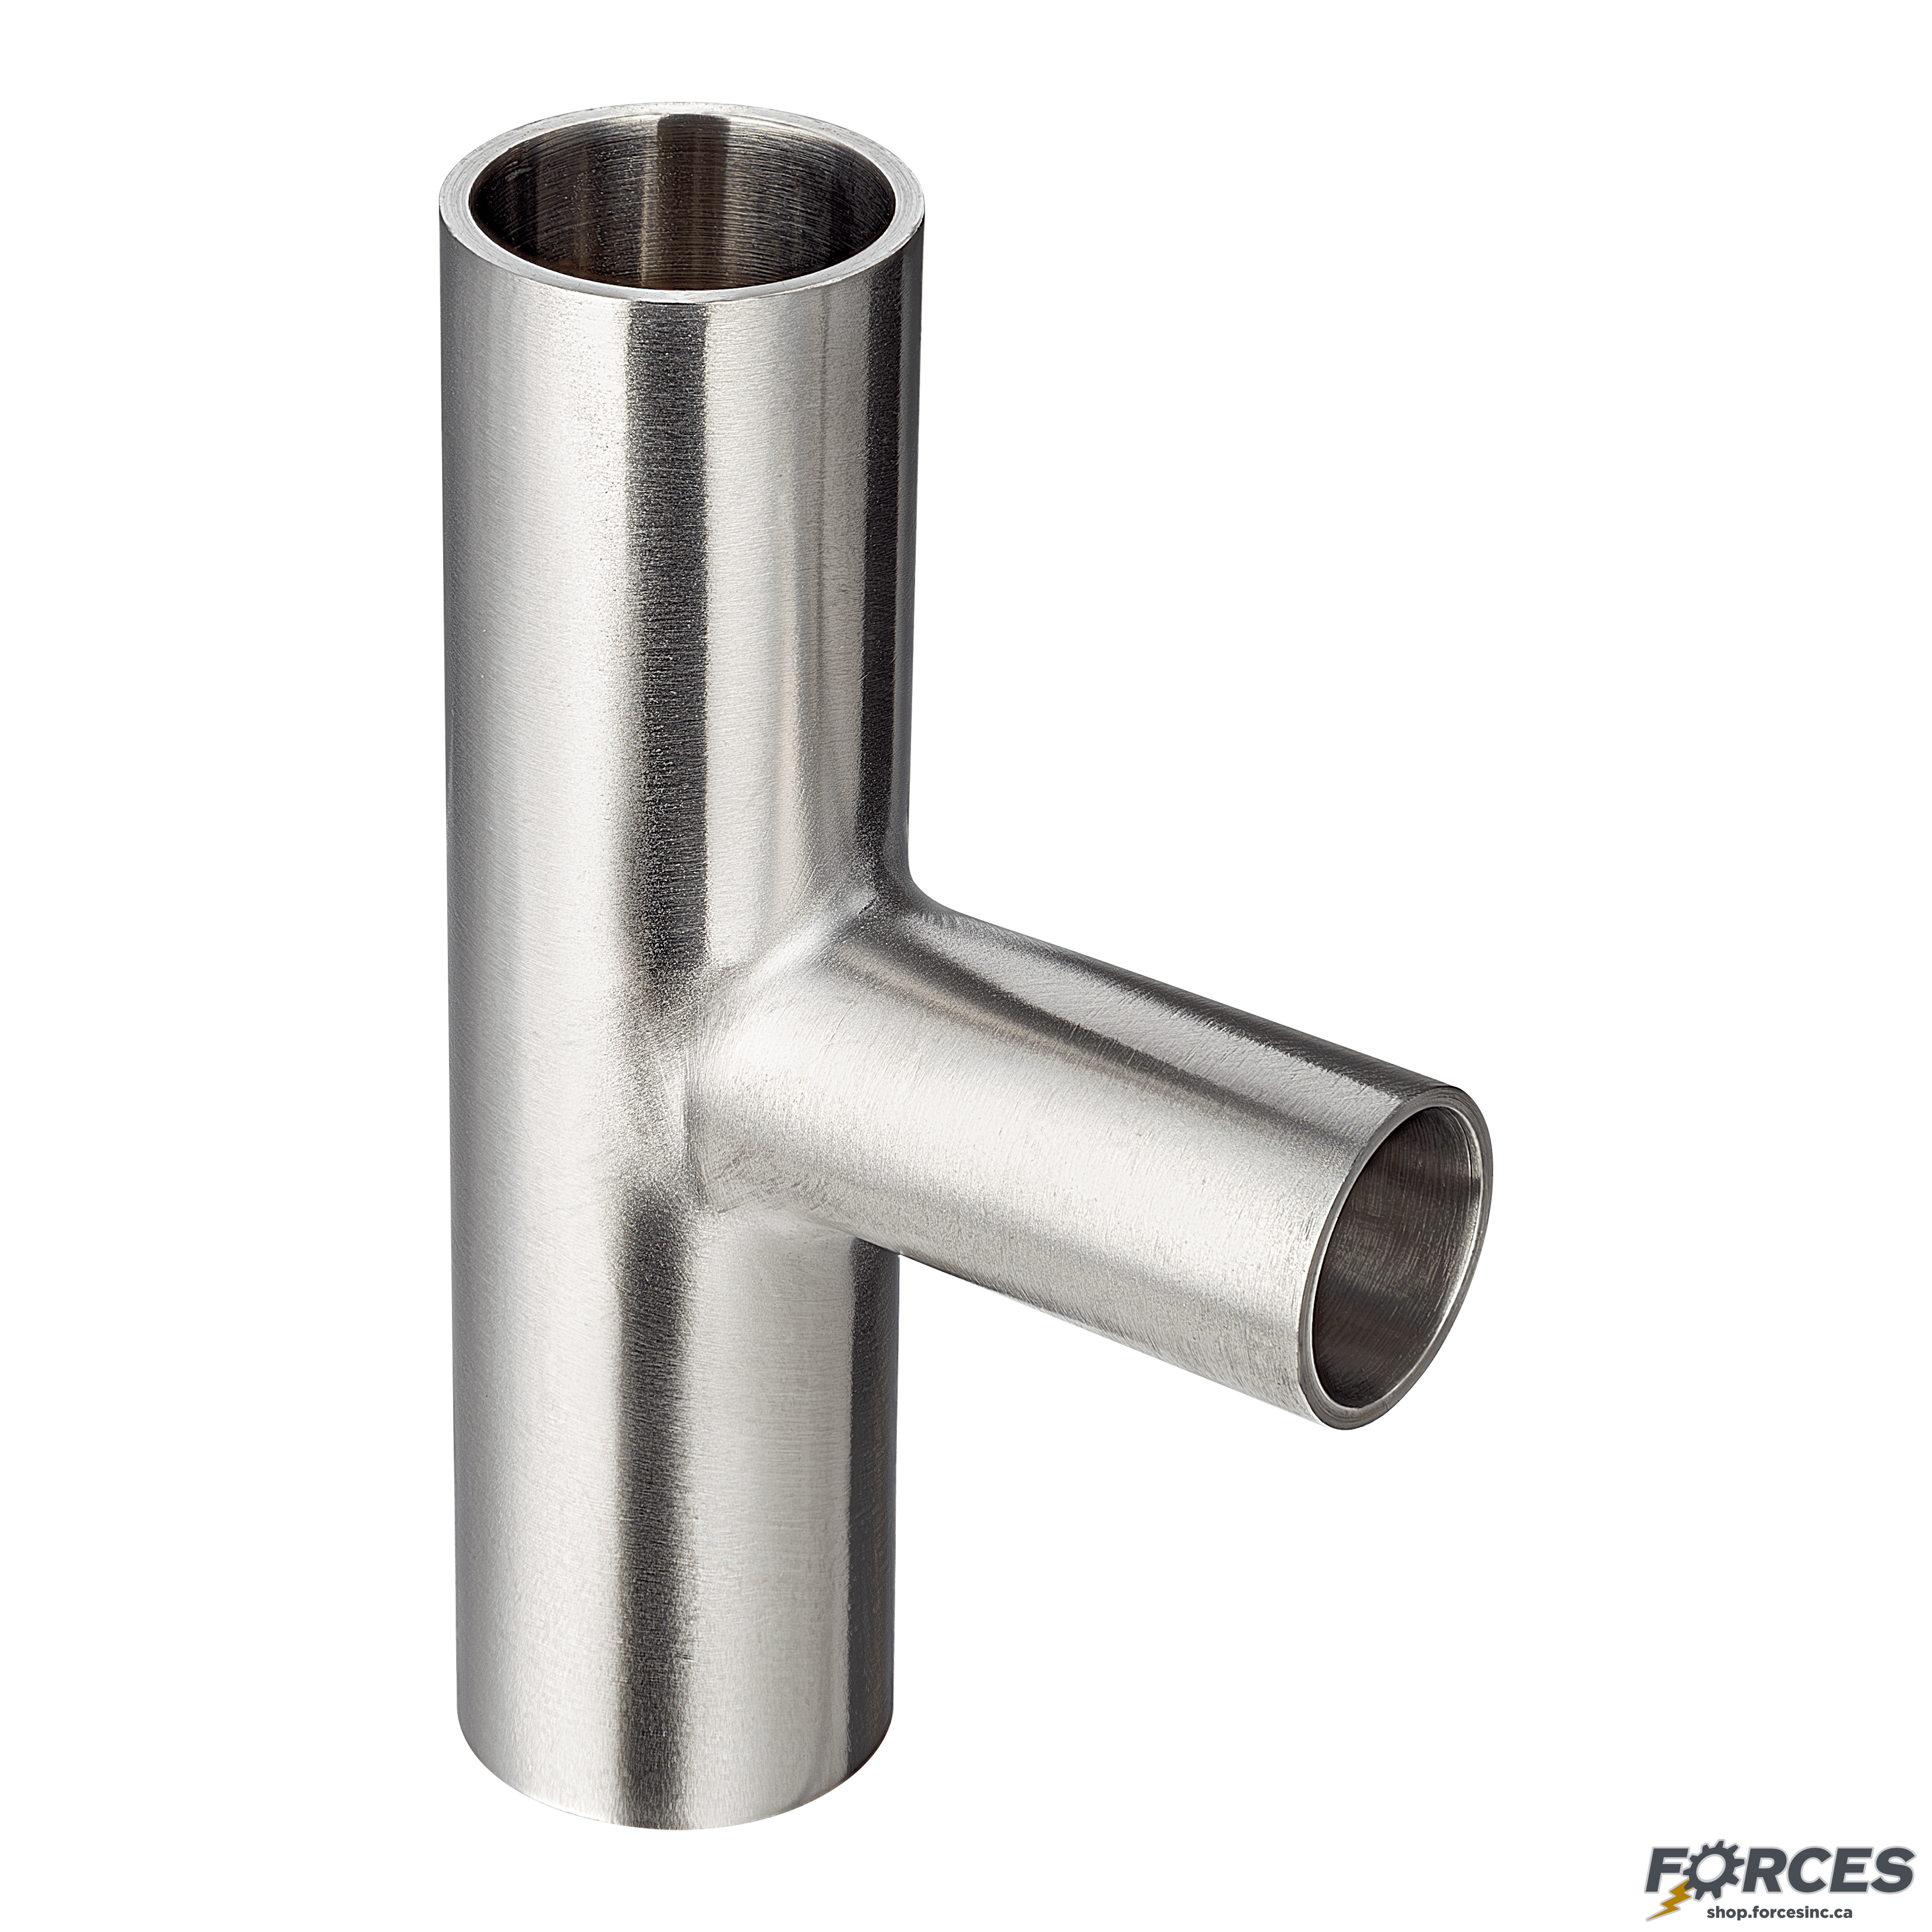 3" x 1" Butt Weld Tee Reducer - Stainless Steel 316 - Forces Inc